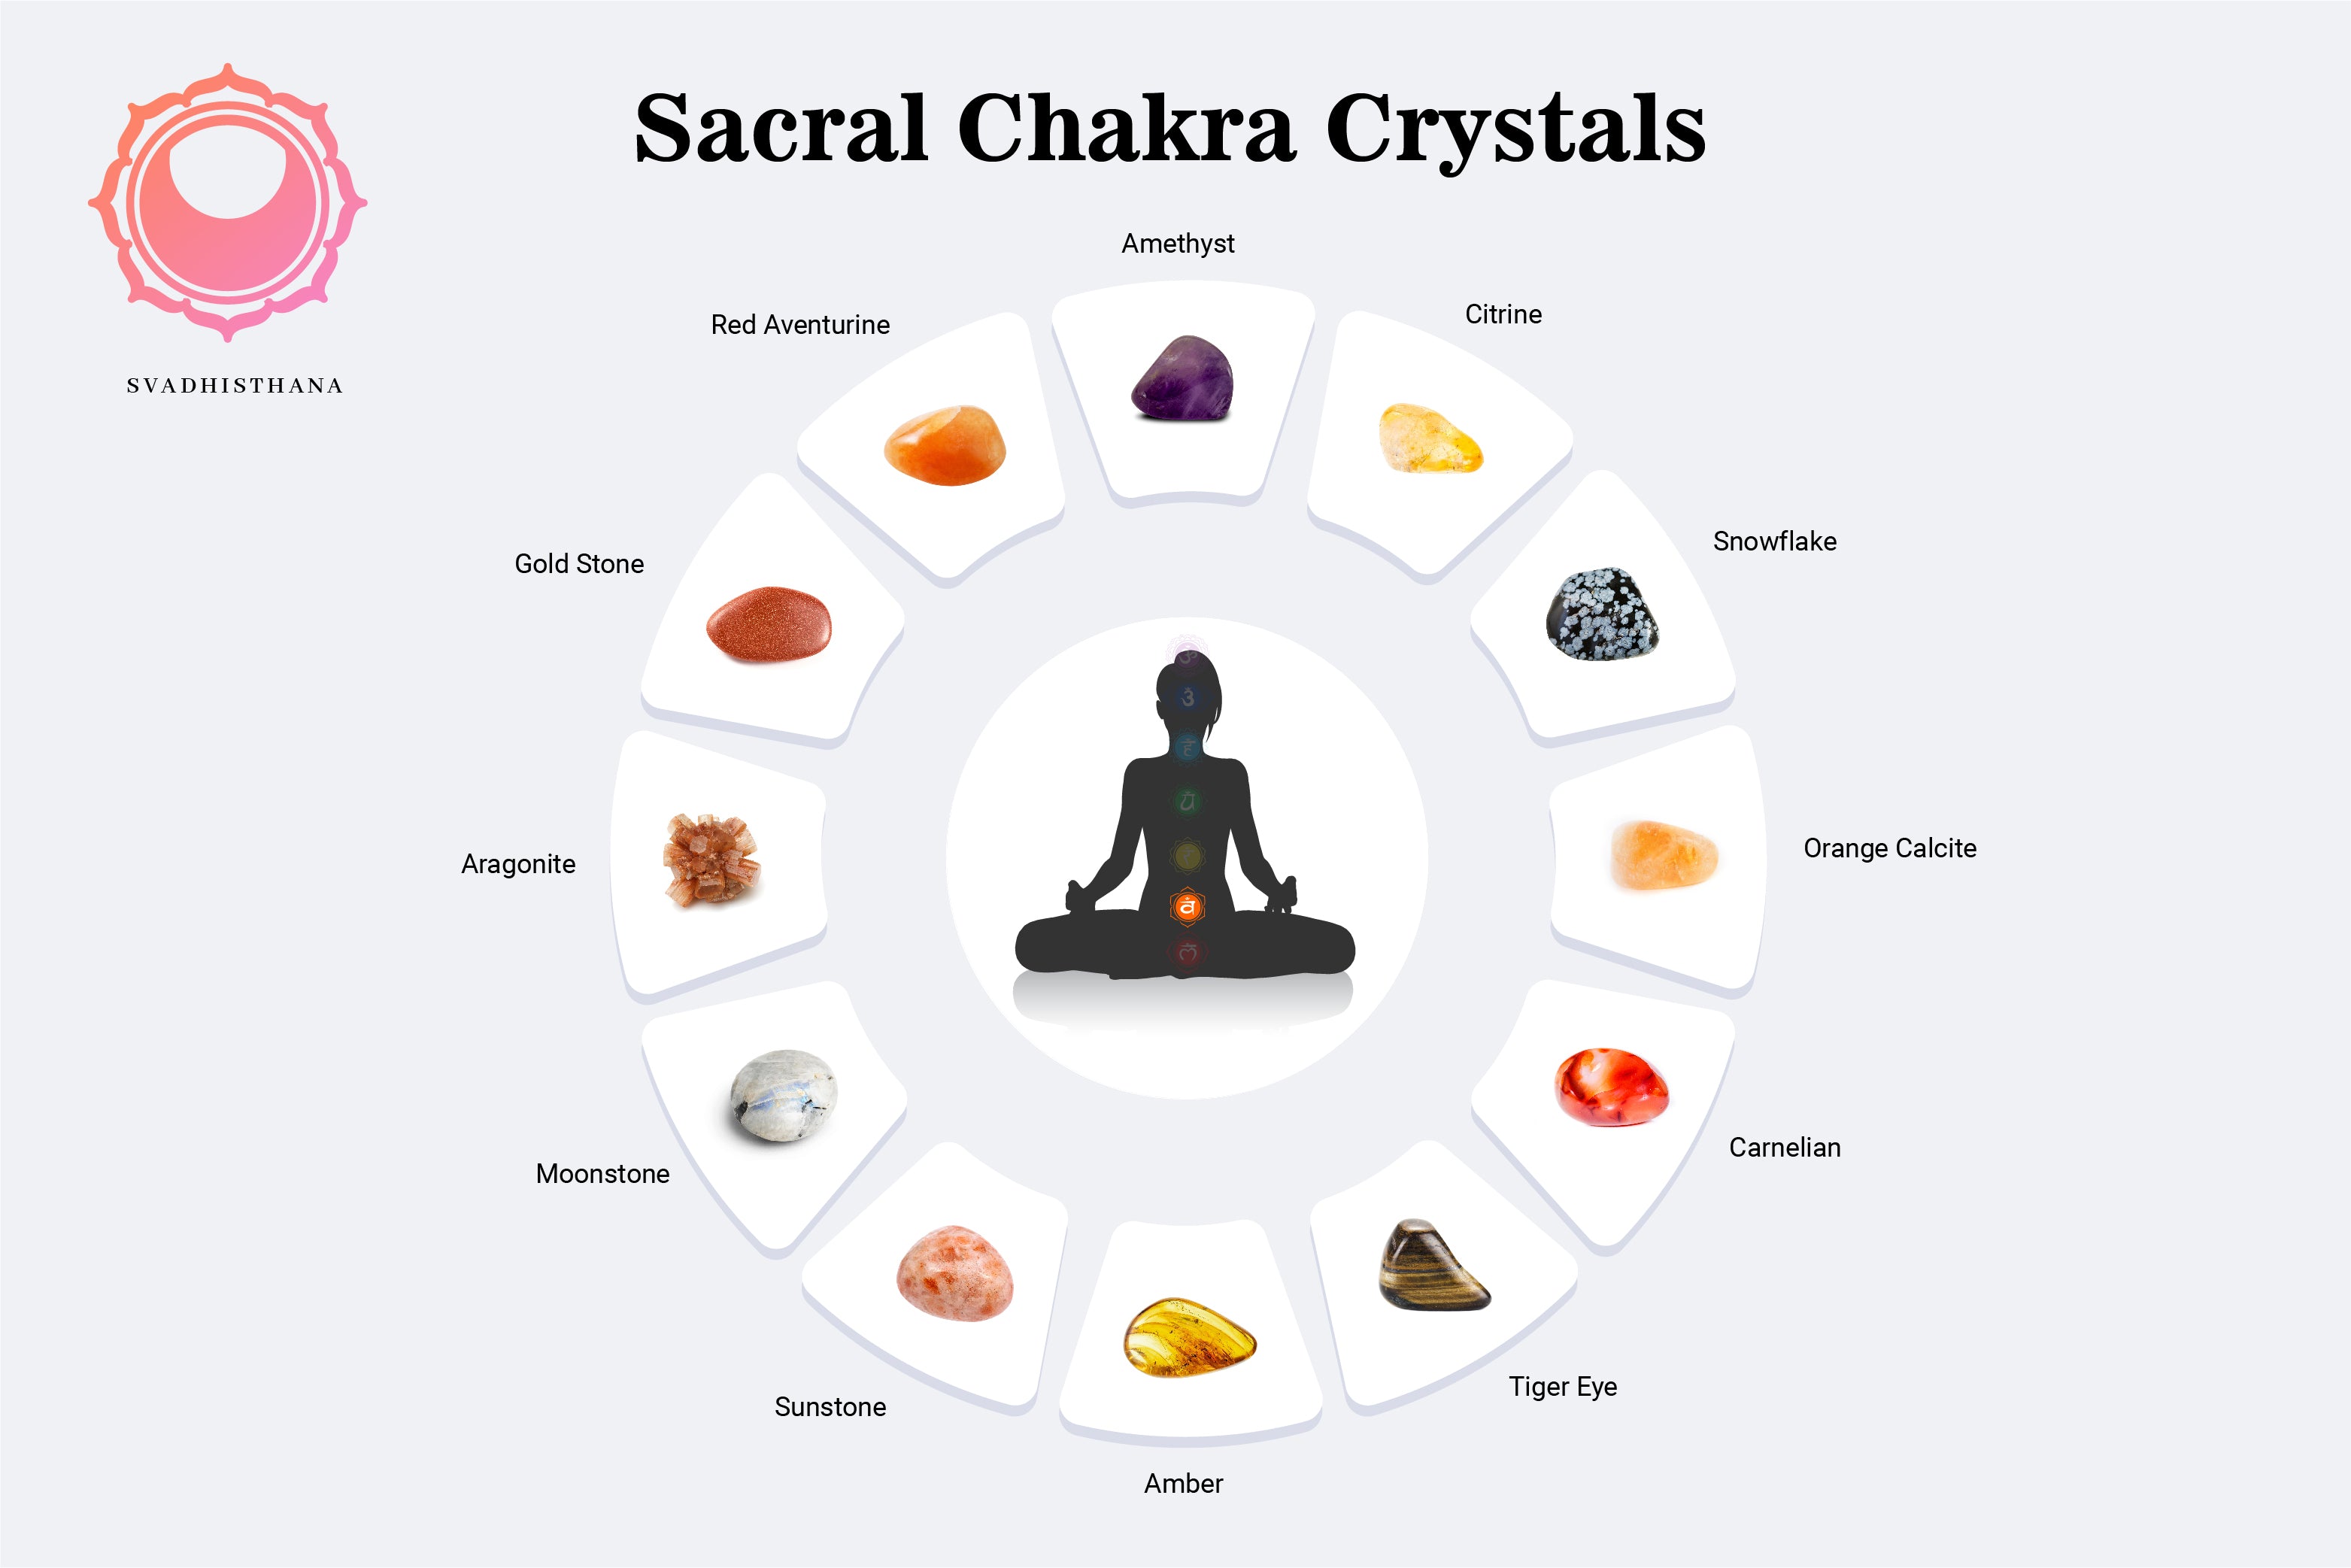 Sacral Chakra Crystals & 8 Stones to Help your Sacral Chakra